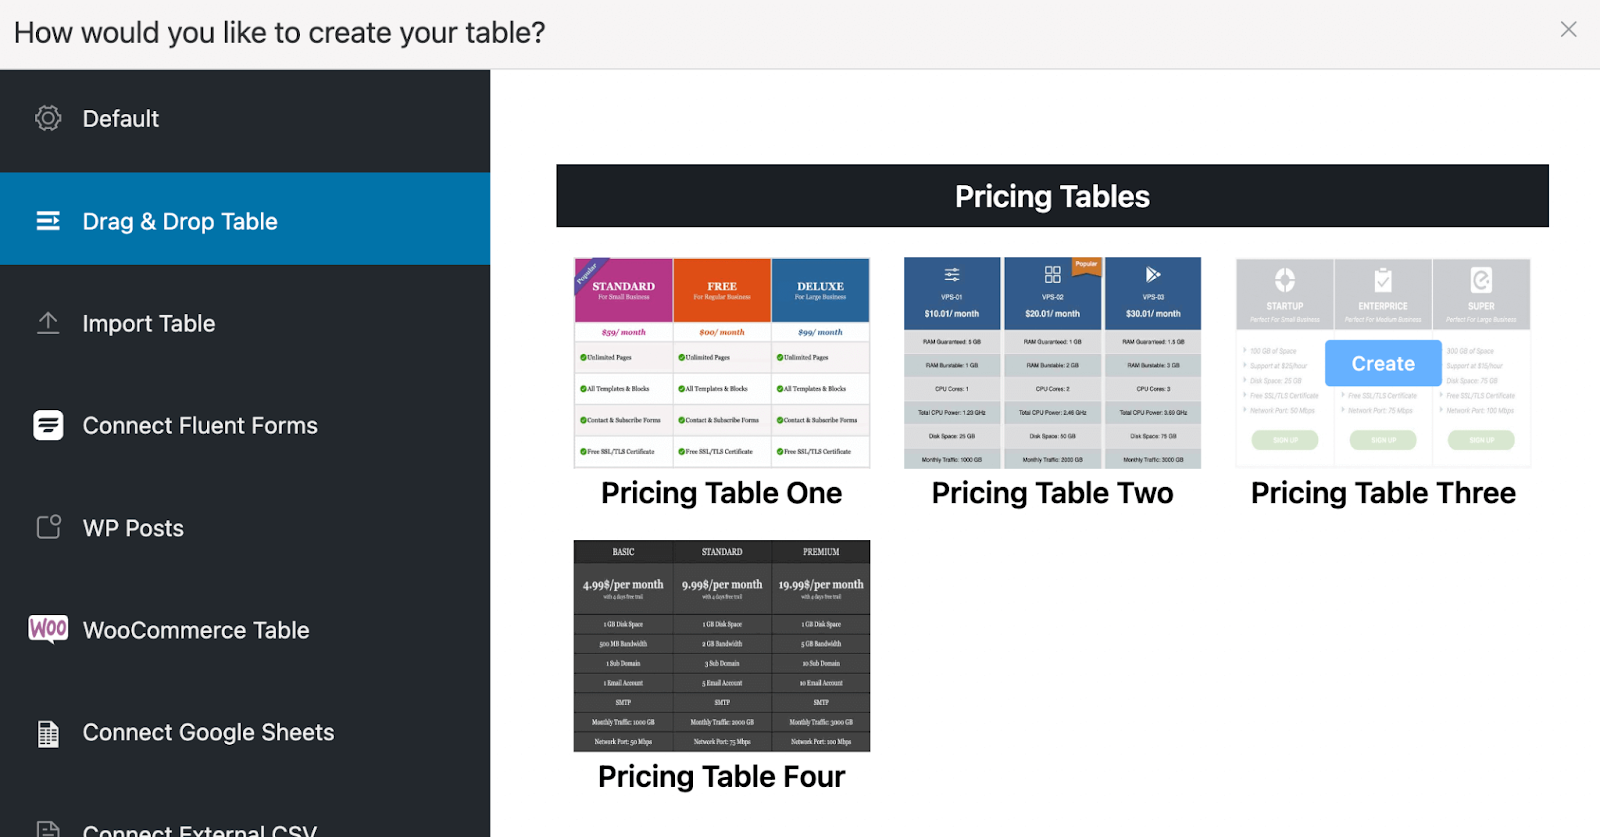 pricing table template